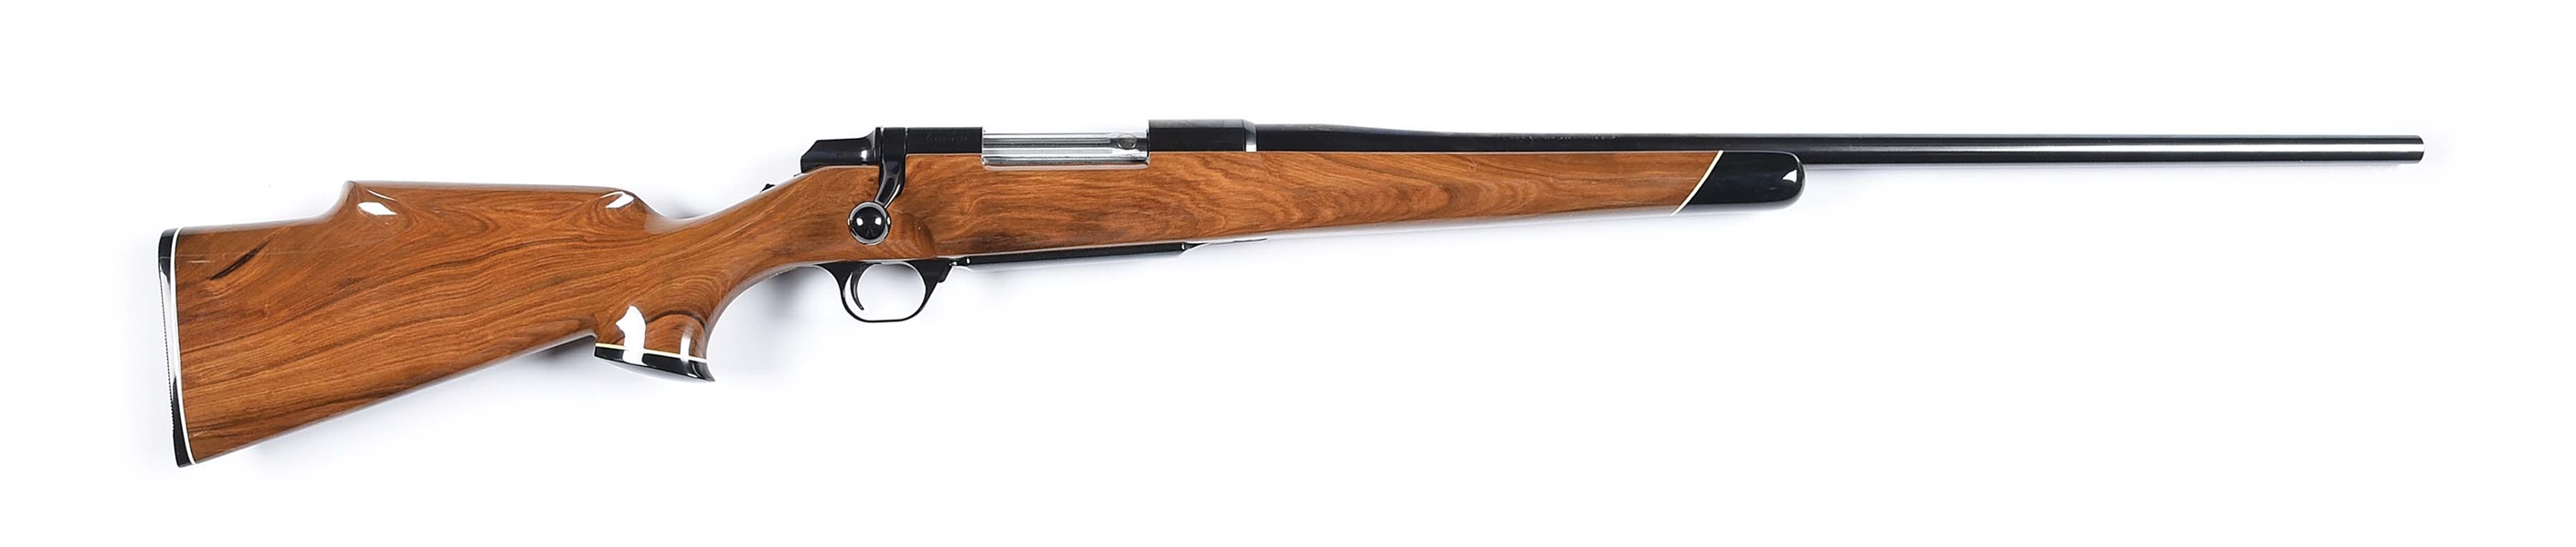 (M) BROWNING BBR BOLT ACTION RIFLE WITH TAMBOOTIE STOCK.